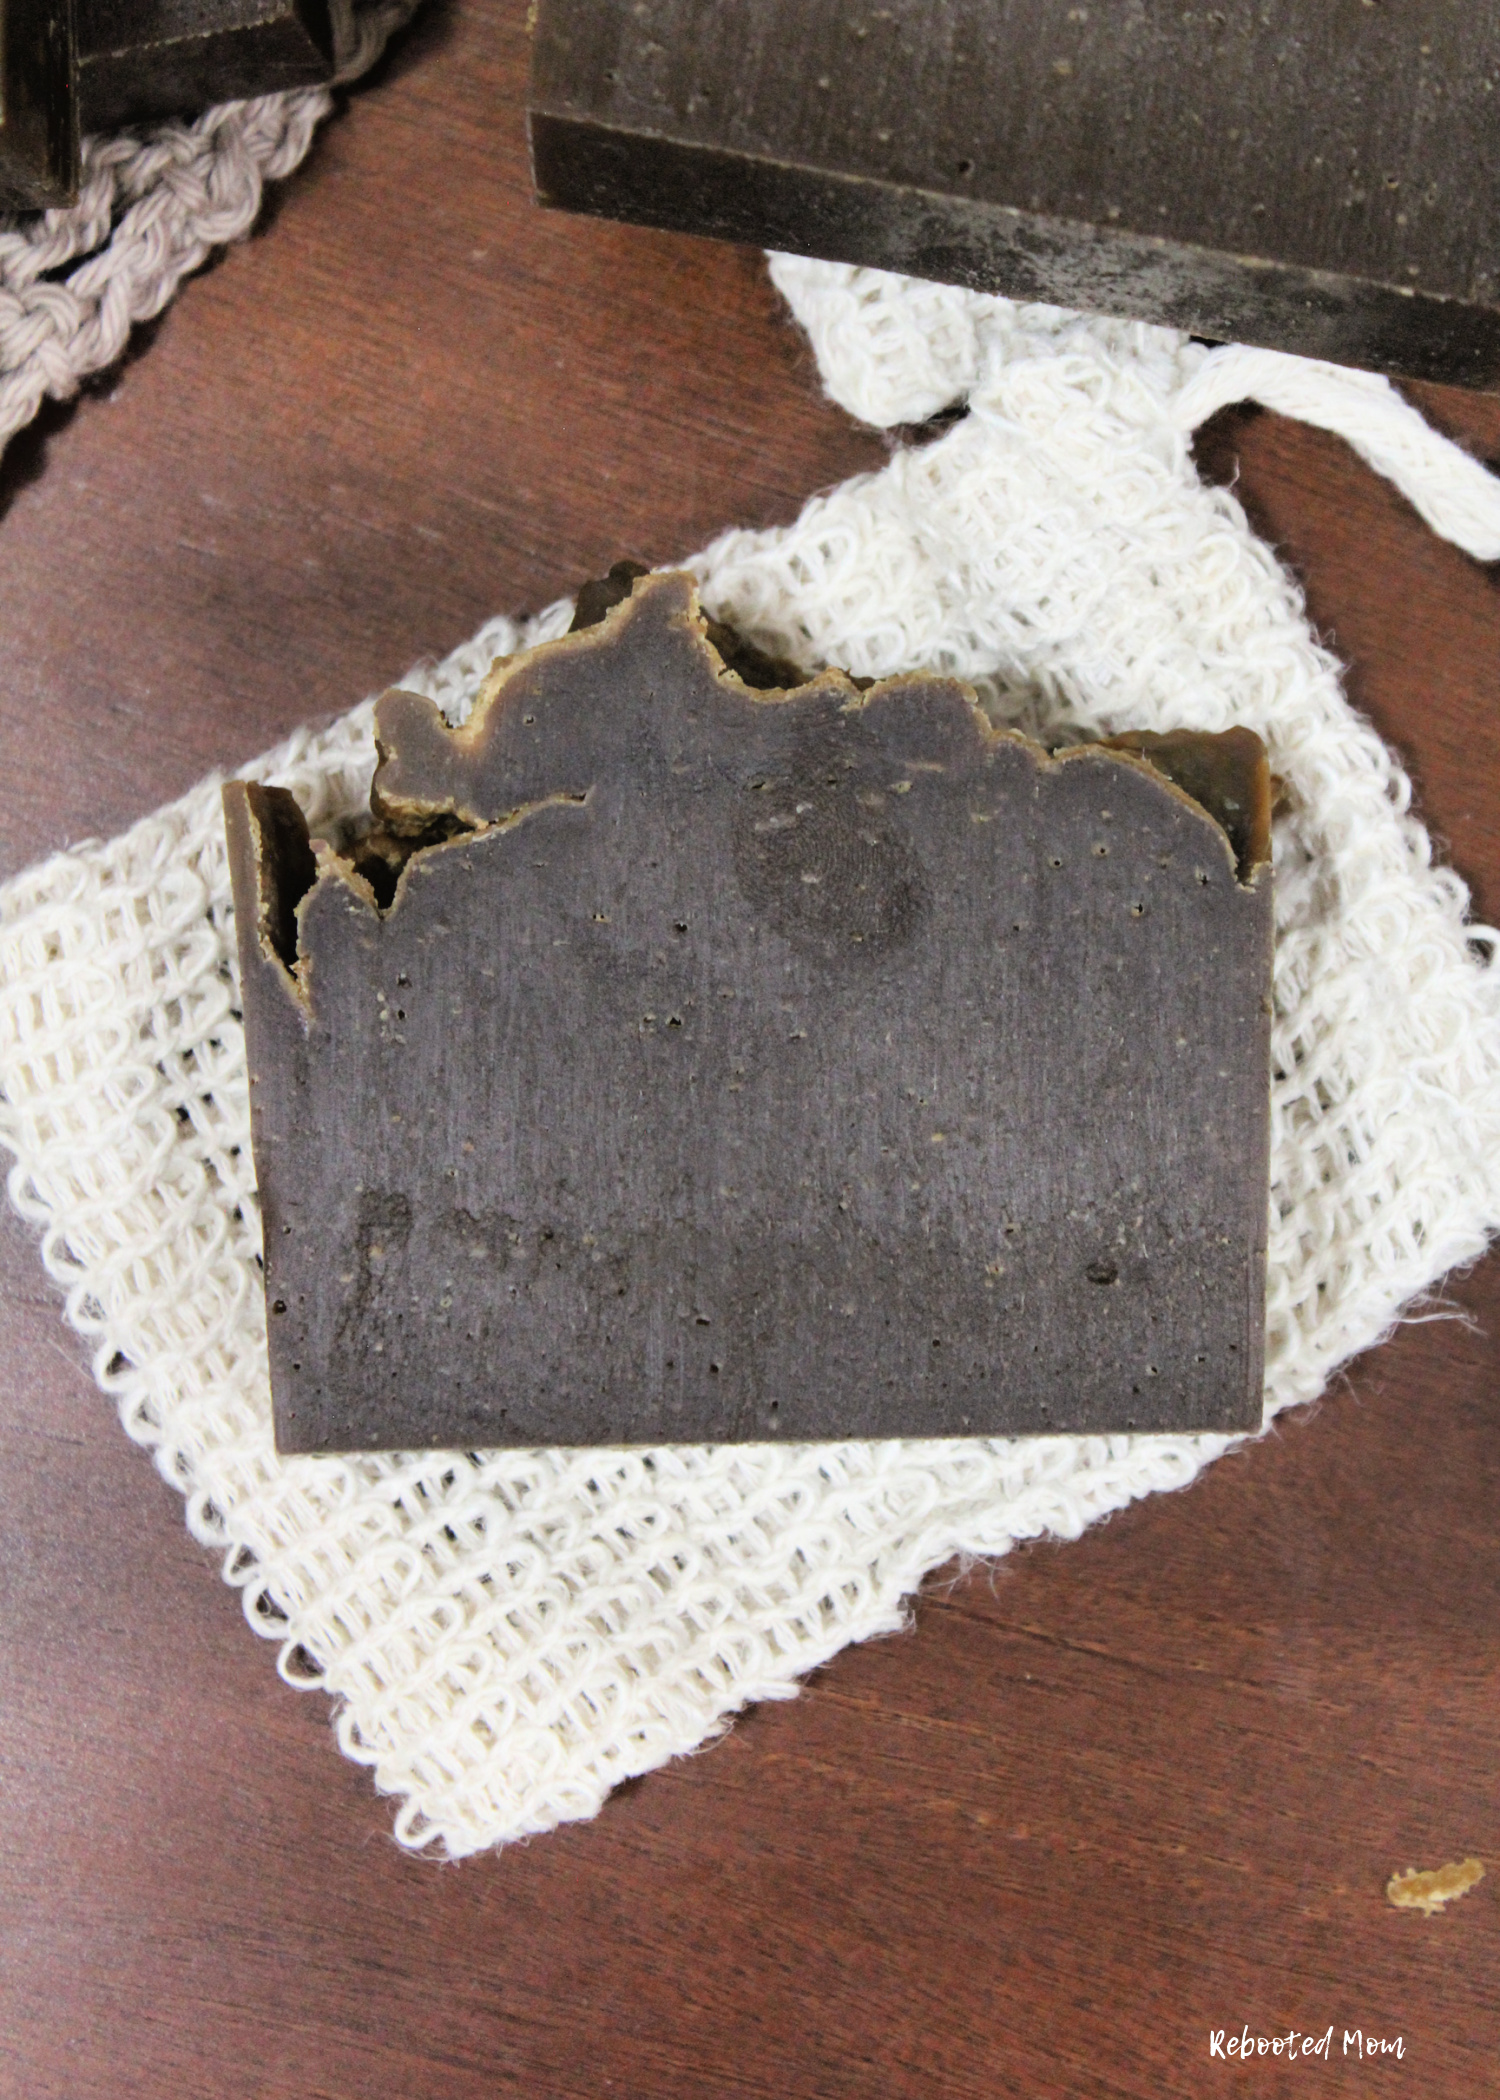 Pine Tar Soap made with Lard - this soap is great for supporting dry, problem skin and conditions such as eczema, psoriasis, dryness and other minor skin irritations.